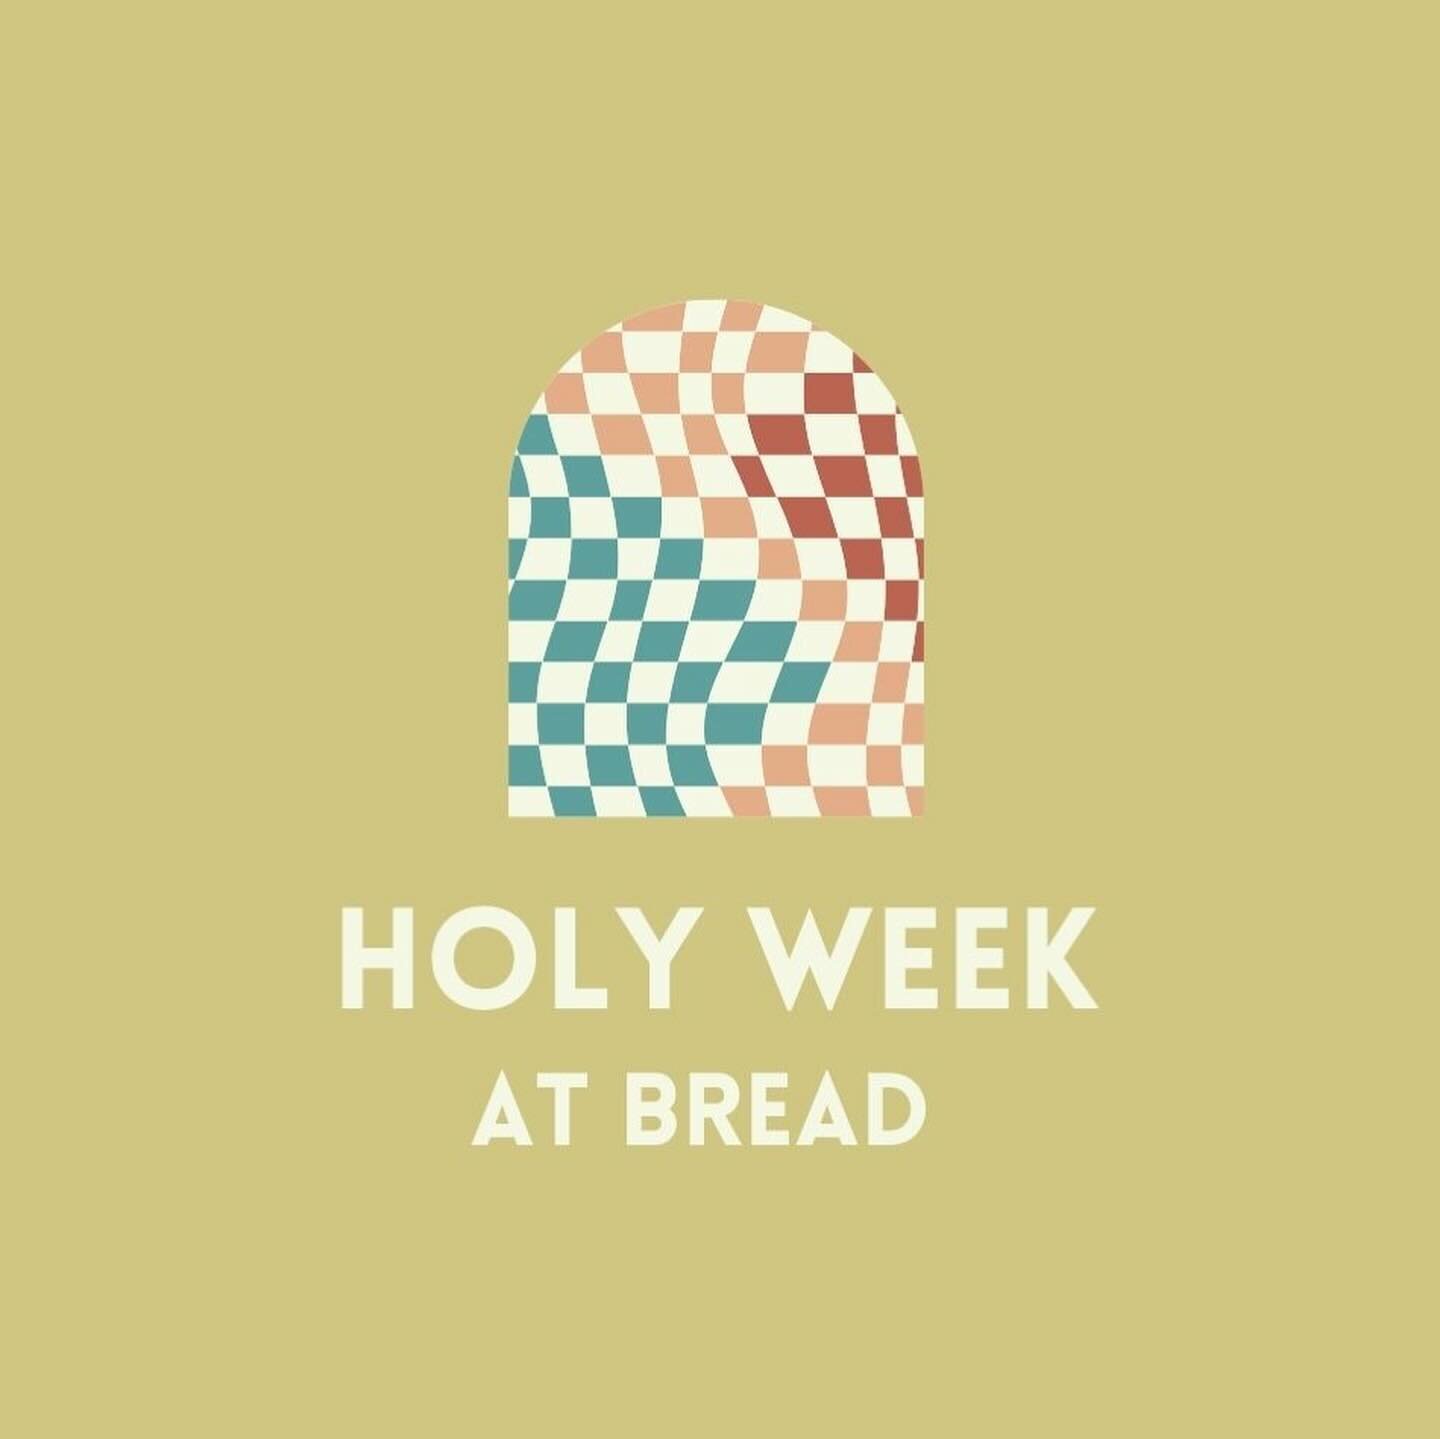 HOLY WEEK AT BREAD ✨
&mdash;&mdash;
Easter&rsquo;s the best day of the year, and we&rsquo;re building up to it with a great week. We want EVERYONE in on the fun.

1. Palm Sunday. This Sunday, we&rsquo;re kicking off service with infant baptisms, foll